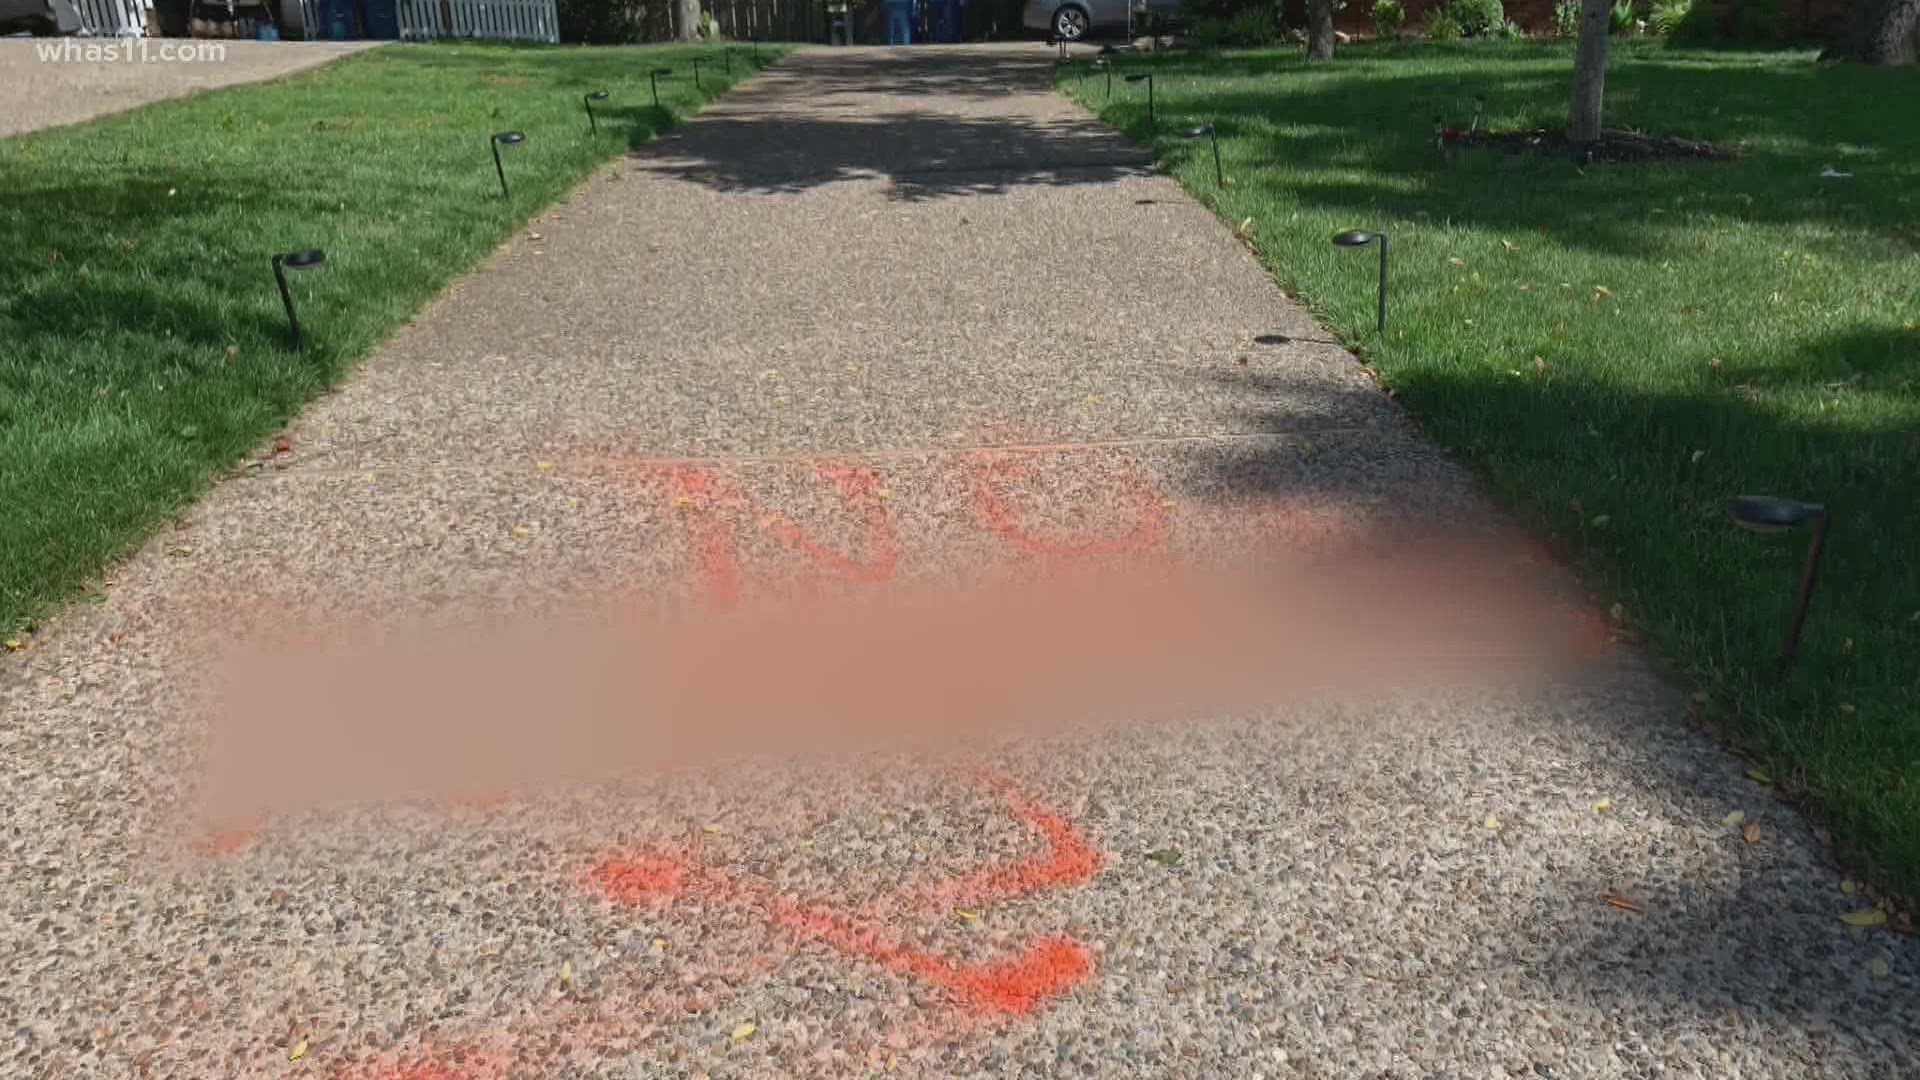 A woman is now facing charges after racial slurs were spray painted on the driveways of two homes in Lake Forest.